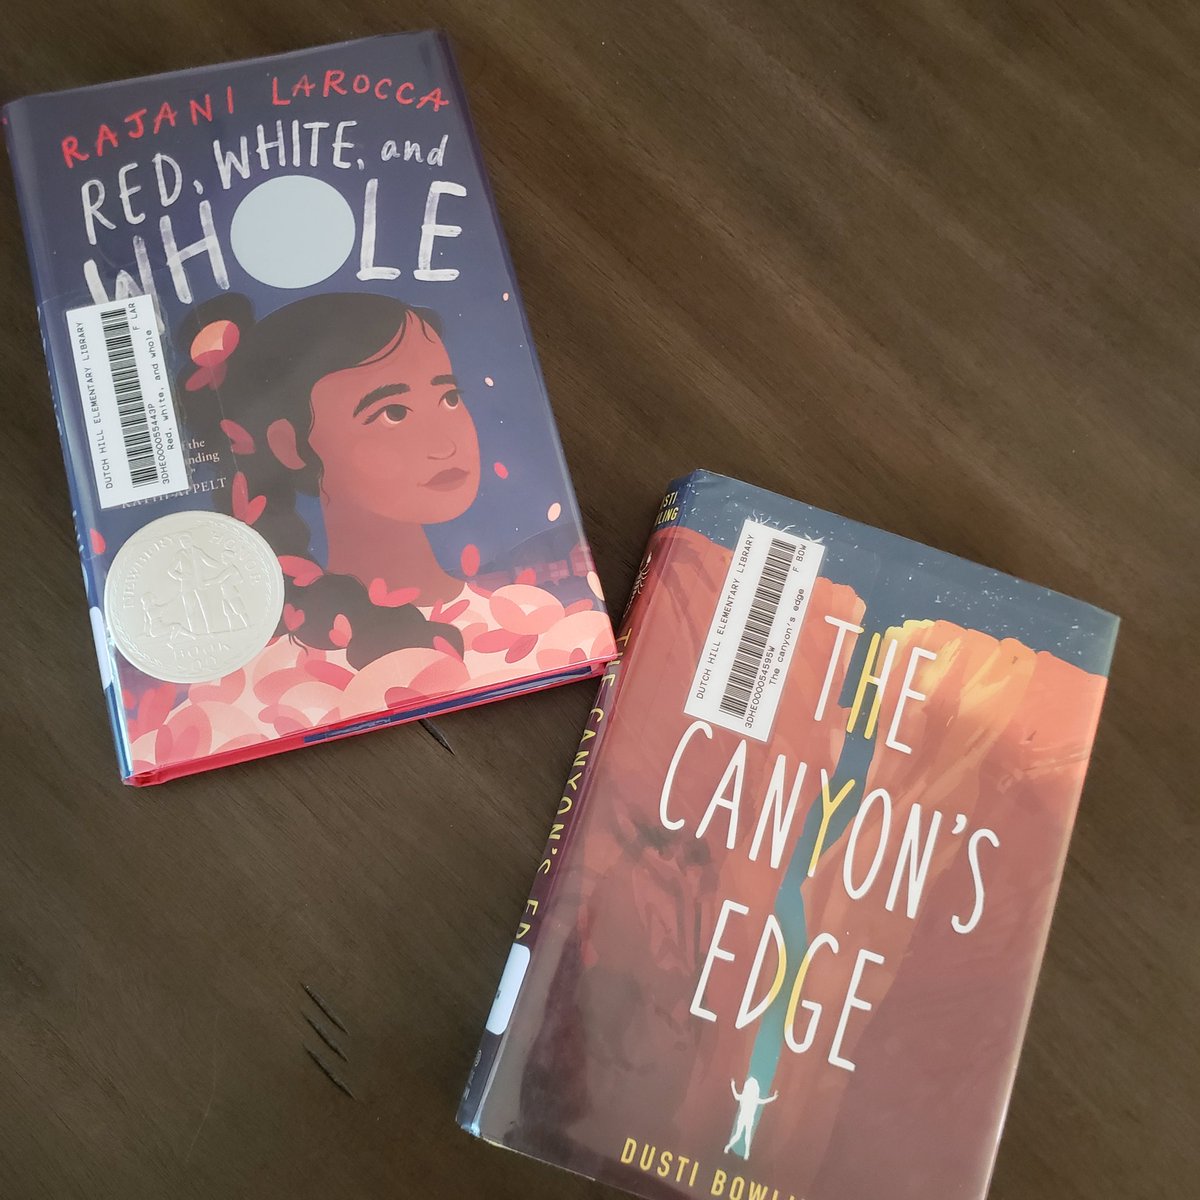 Two #NovelsInVerse this week. Red, White, and Whole and The Canyon's Edge. Both gripping,  original and so heart rending. I am in awe of how @rajanilarocca and @DustiBowling can express such emotion and tell such great stories in verse #MGBook #LibrarianTwitter